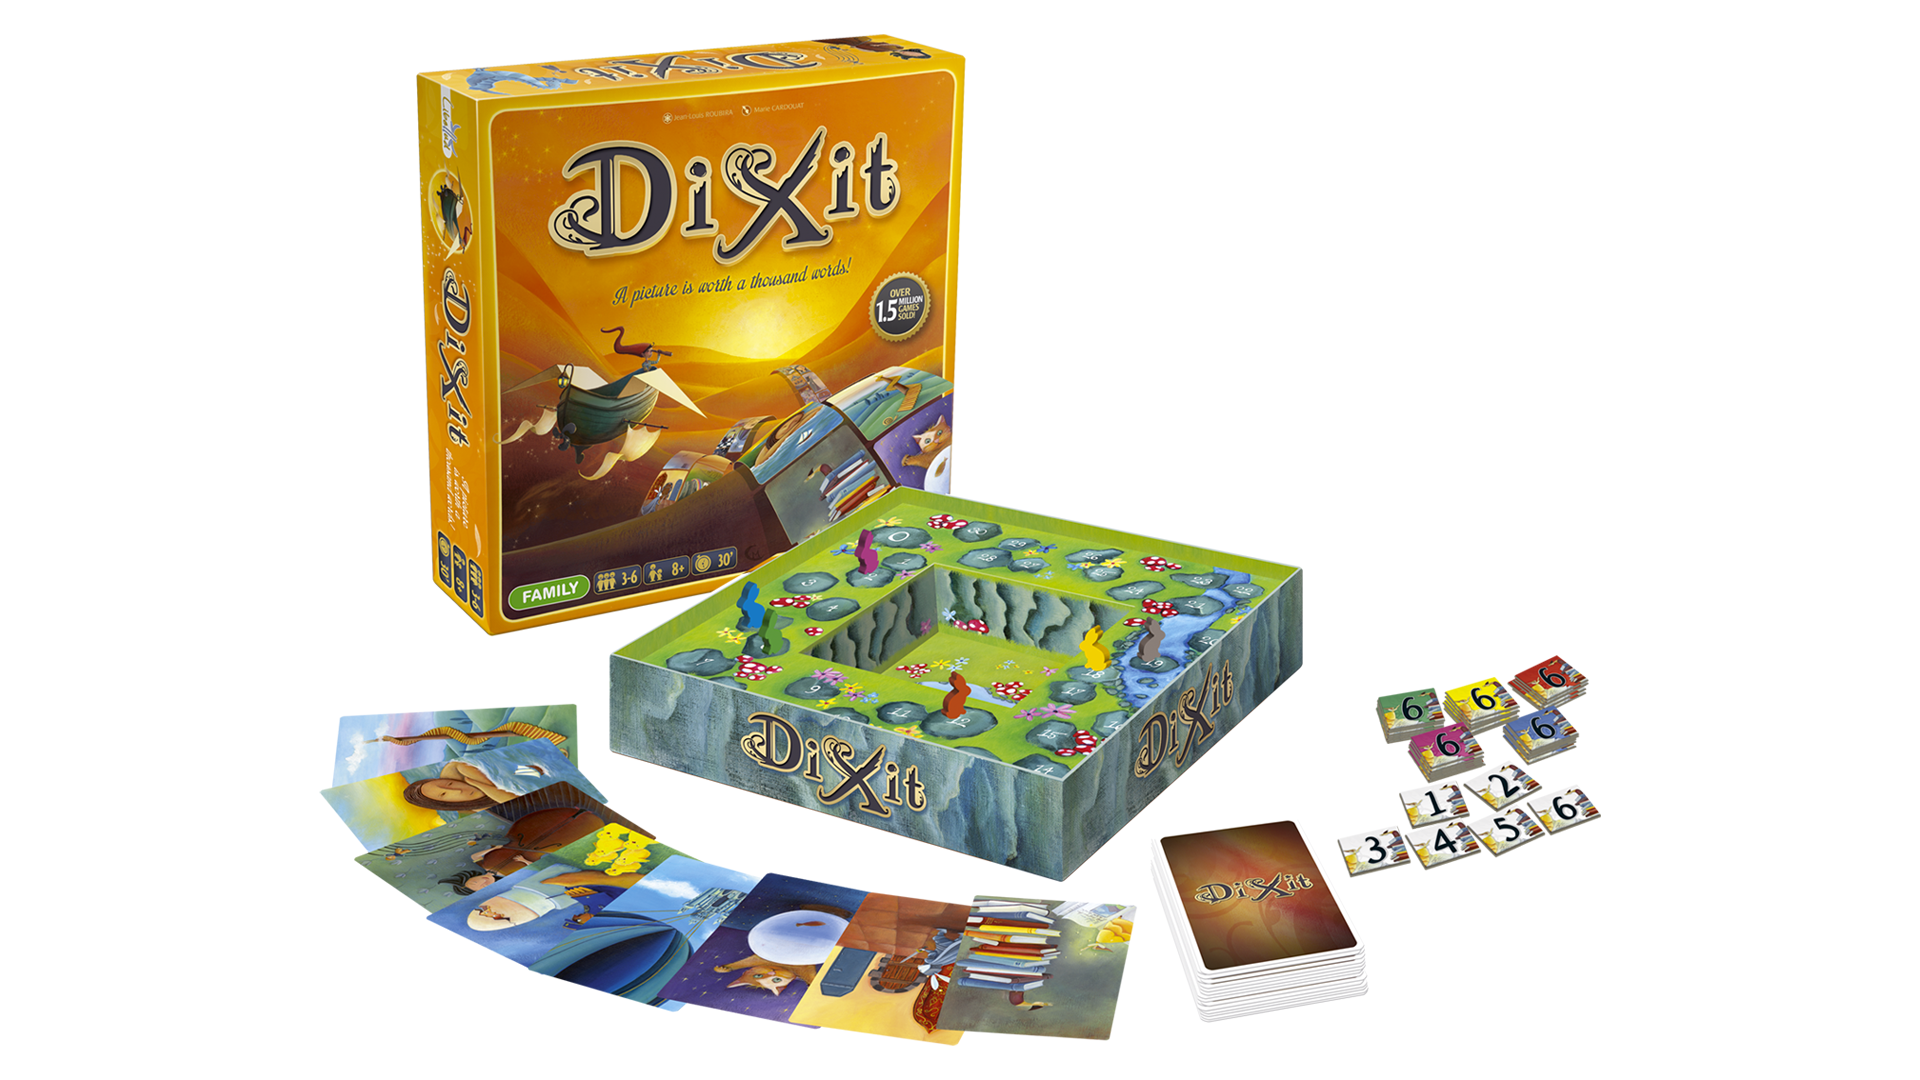 Dixit beginner board game box and components